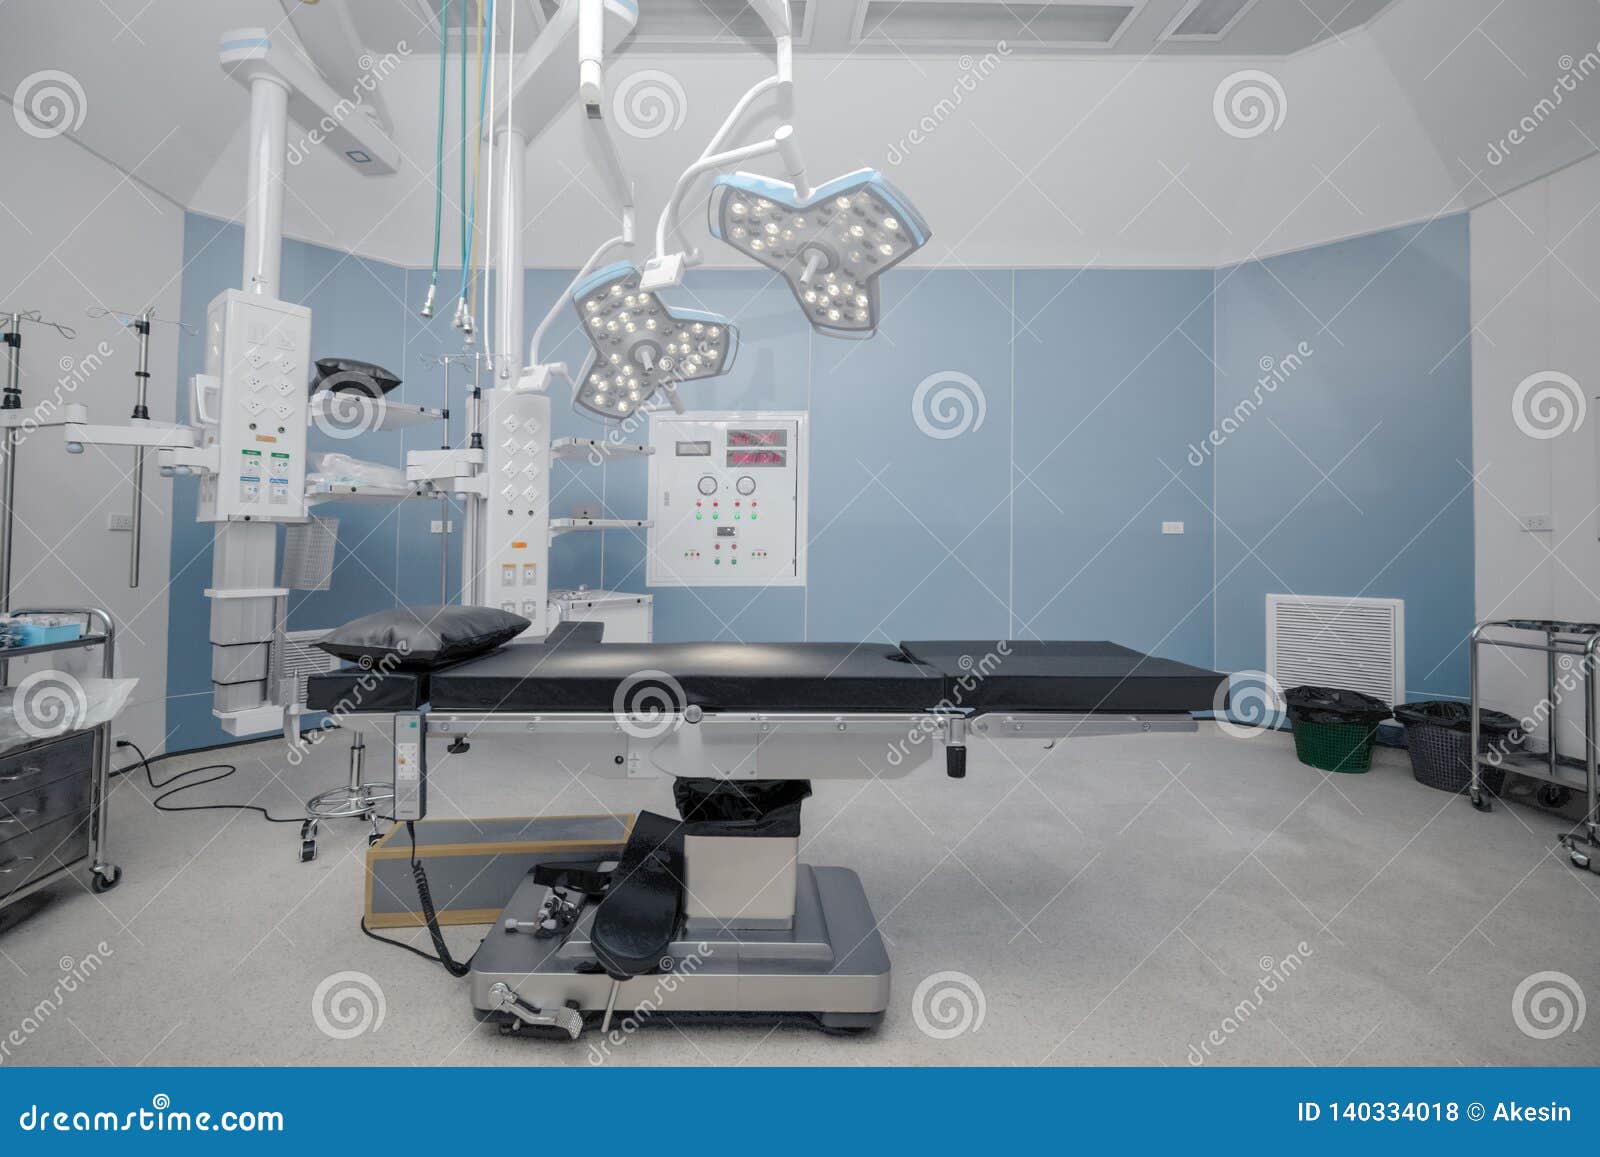 empty operation room with surgery bed and surgery light